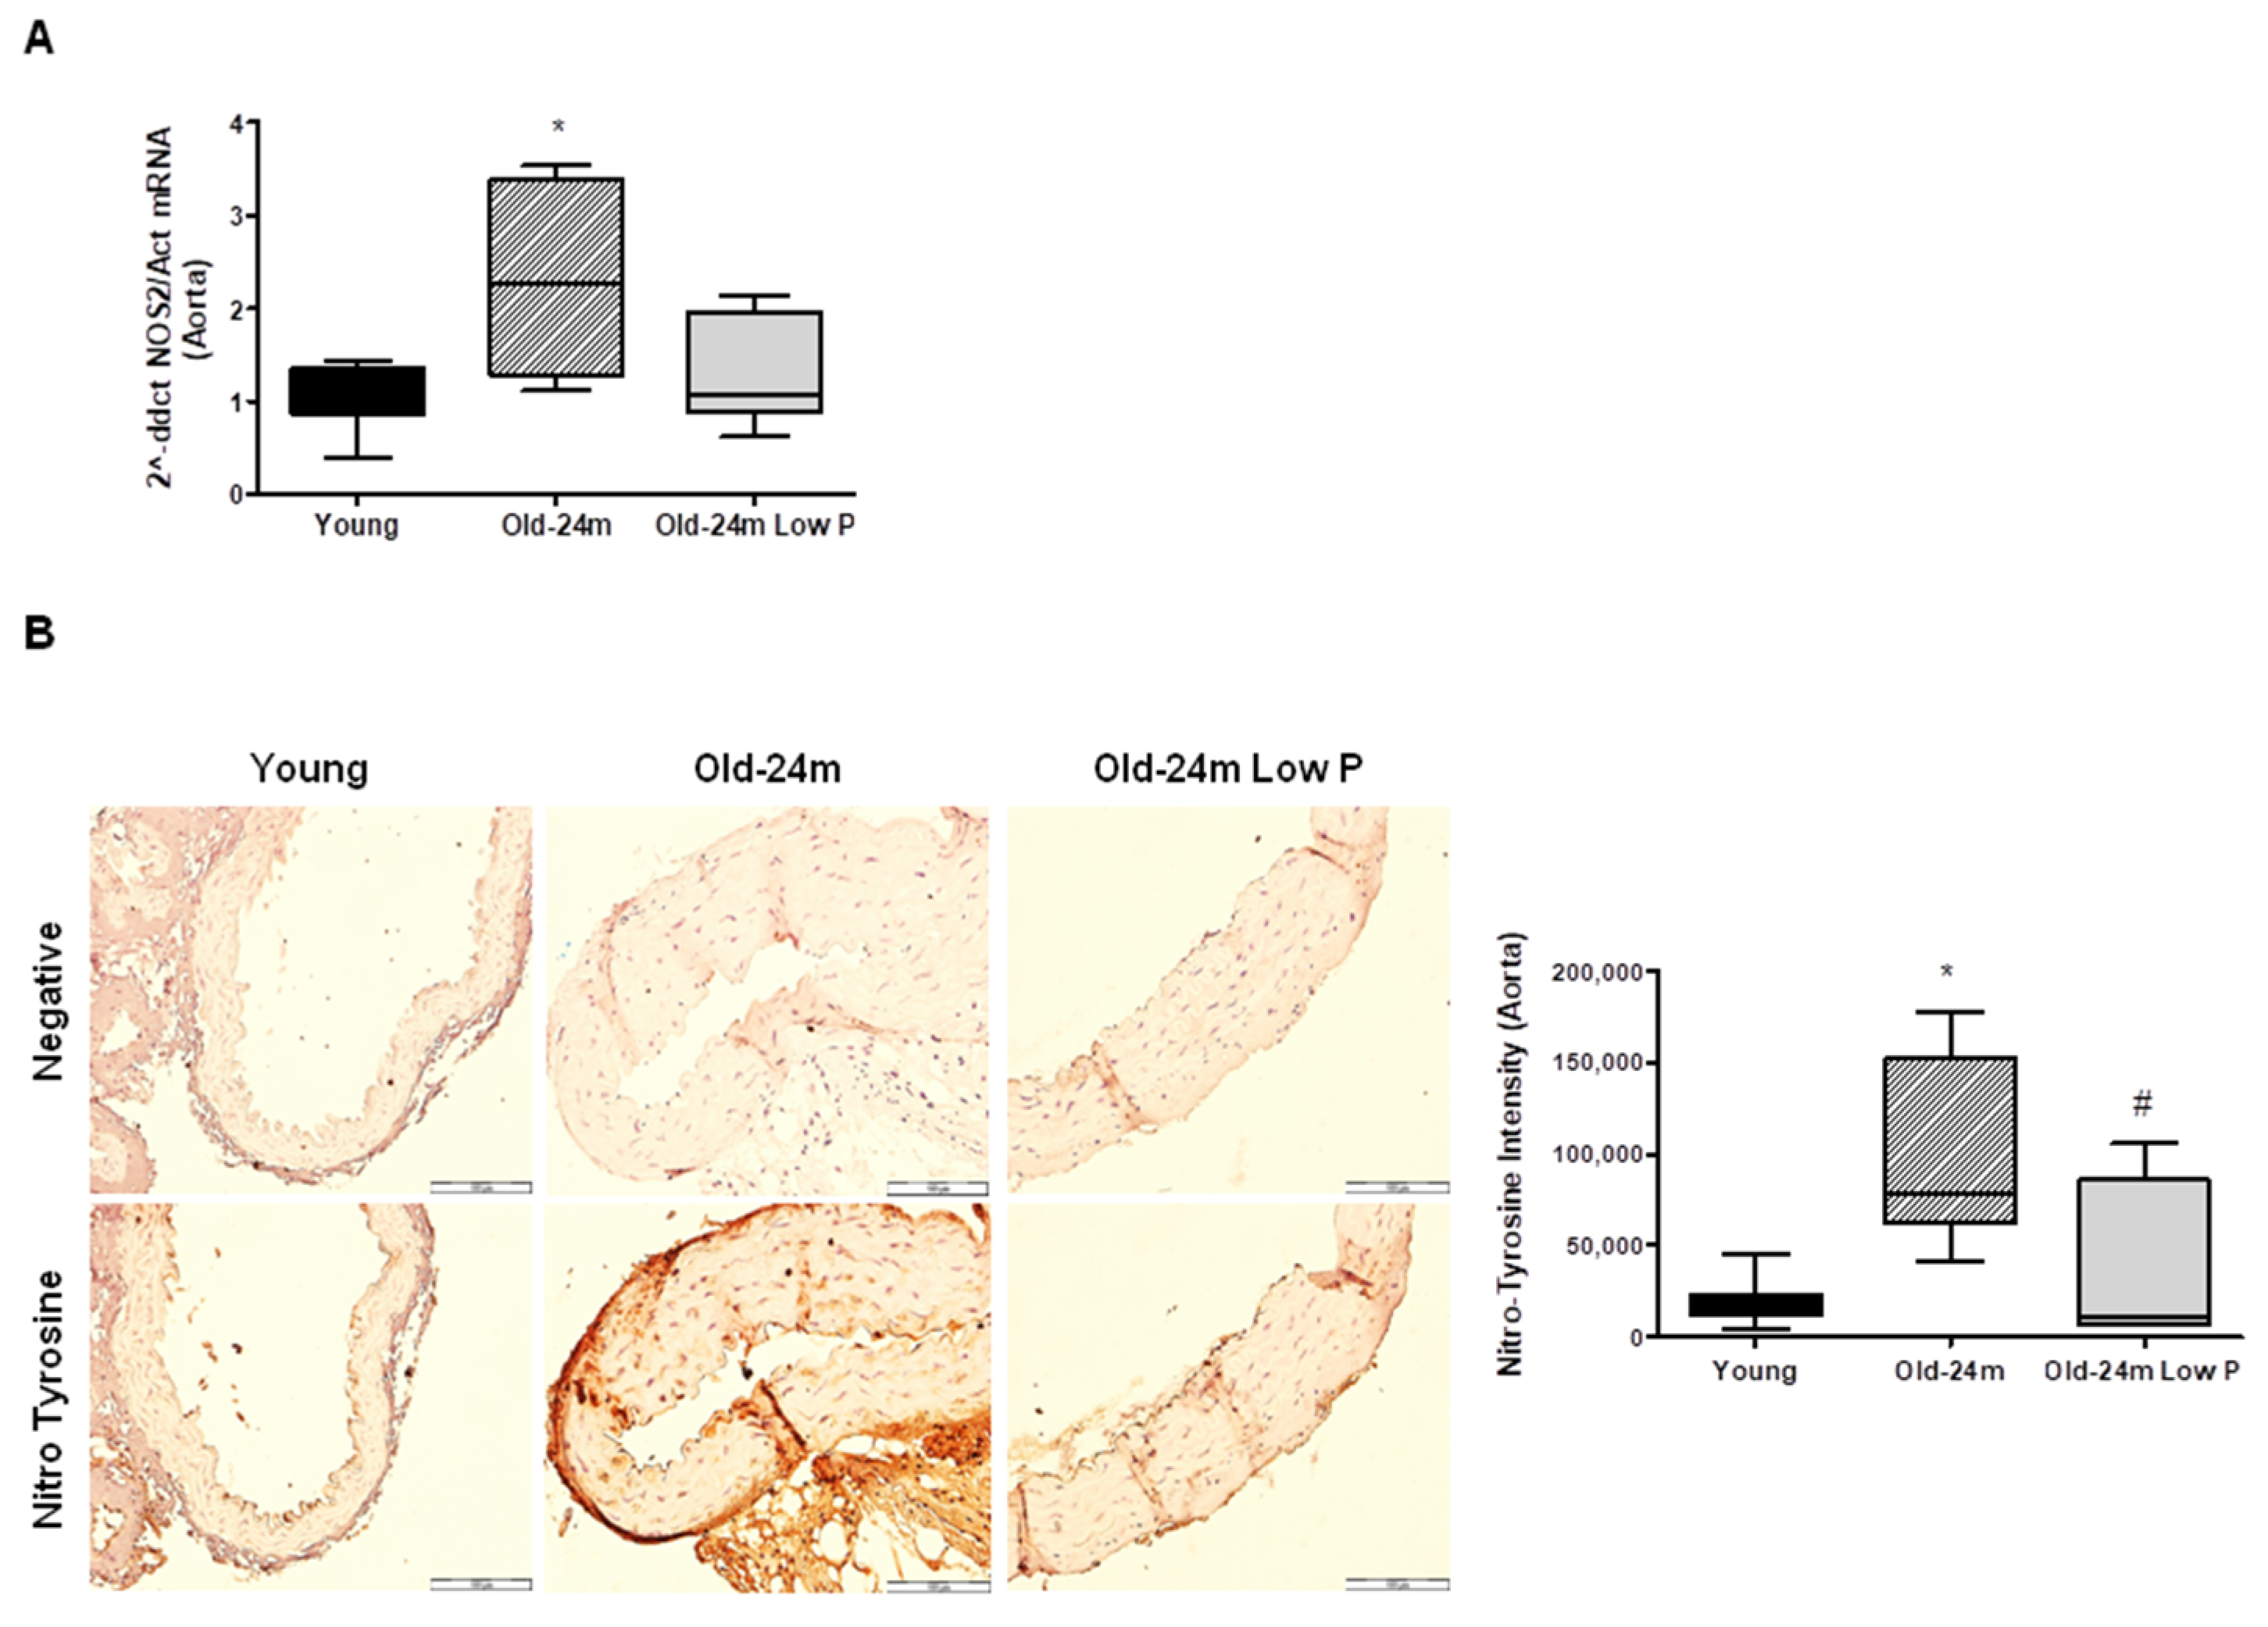 Antioxidants | Free Full-Text | Hyperphosphatemia-Induced  Oxidant/Antioxidant Imbalance Impairs Vascular Relaxation and Induces  Inflammation and Fibrosis in Old Mice | HTML